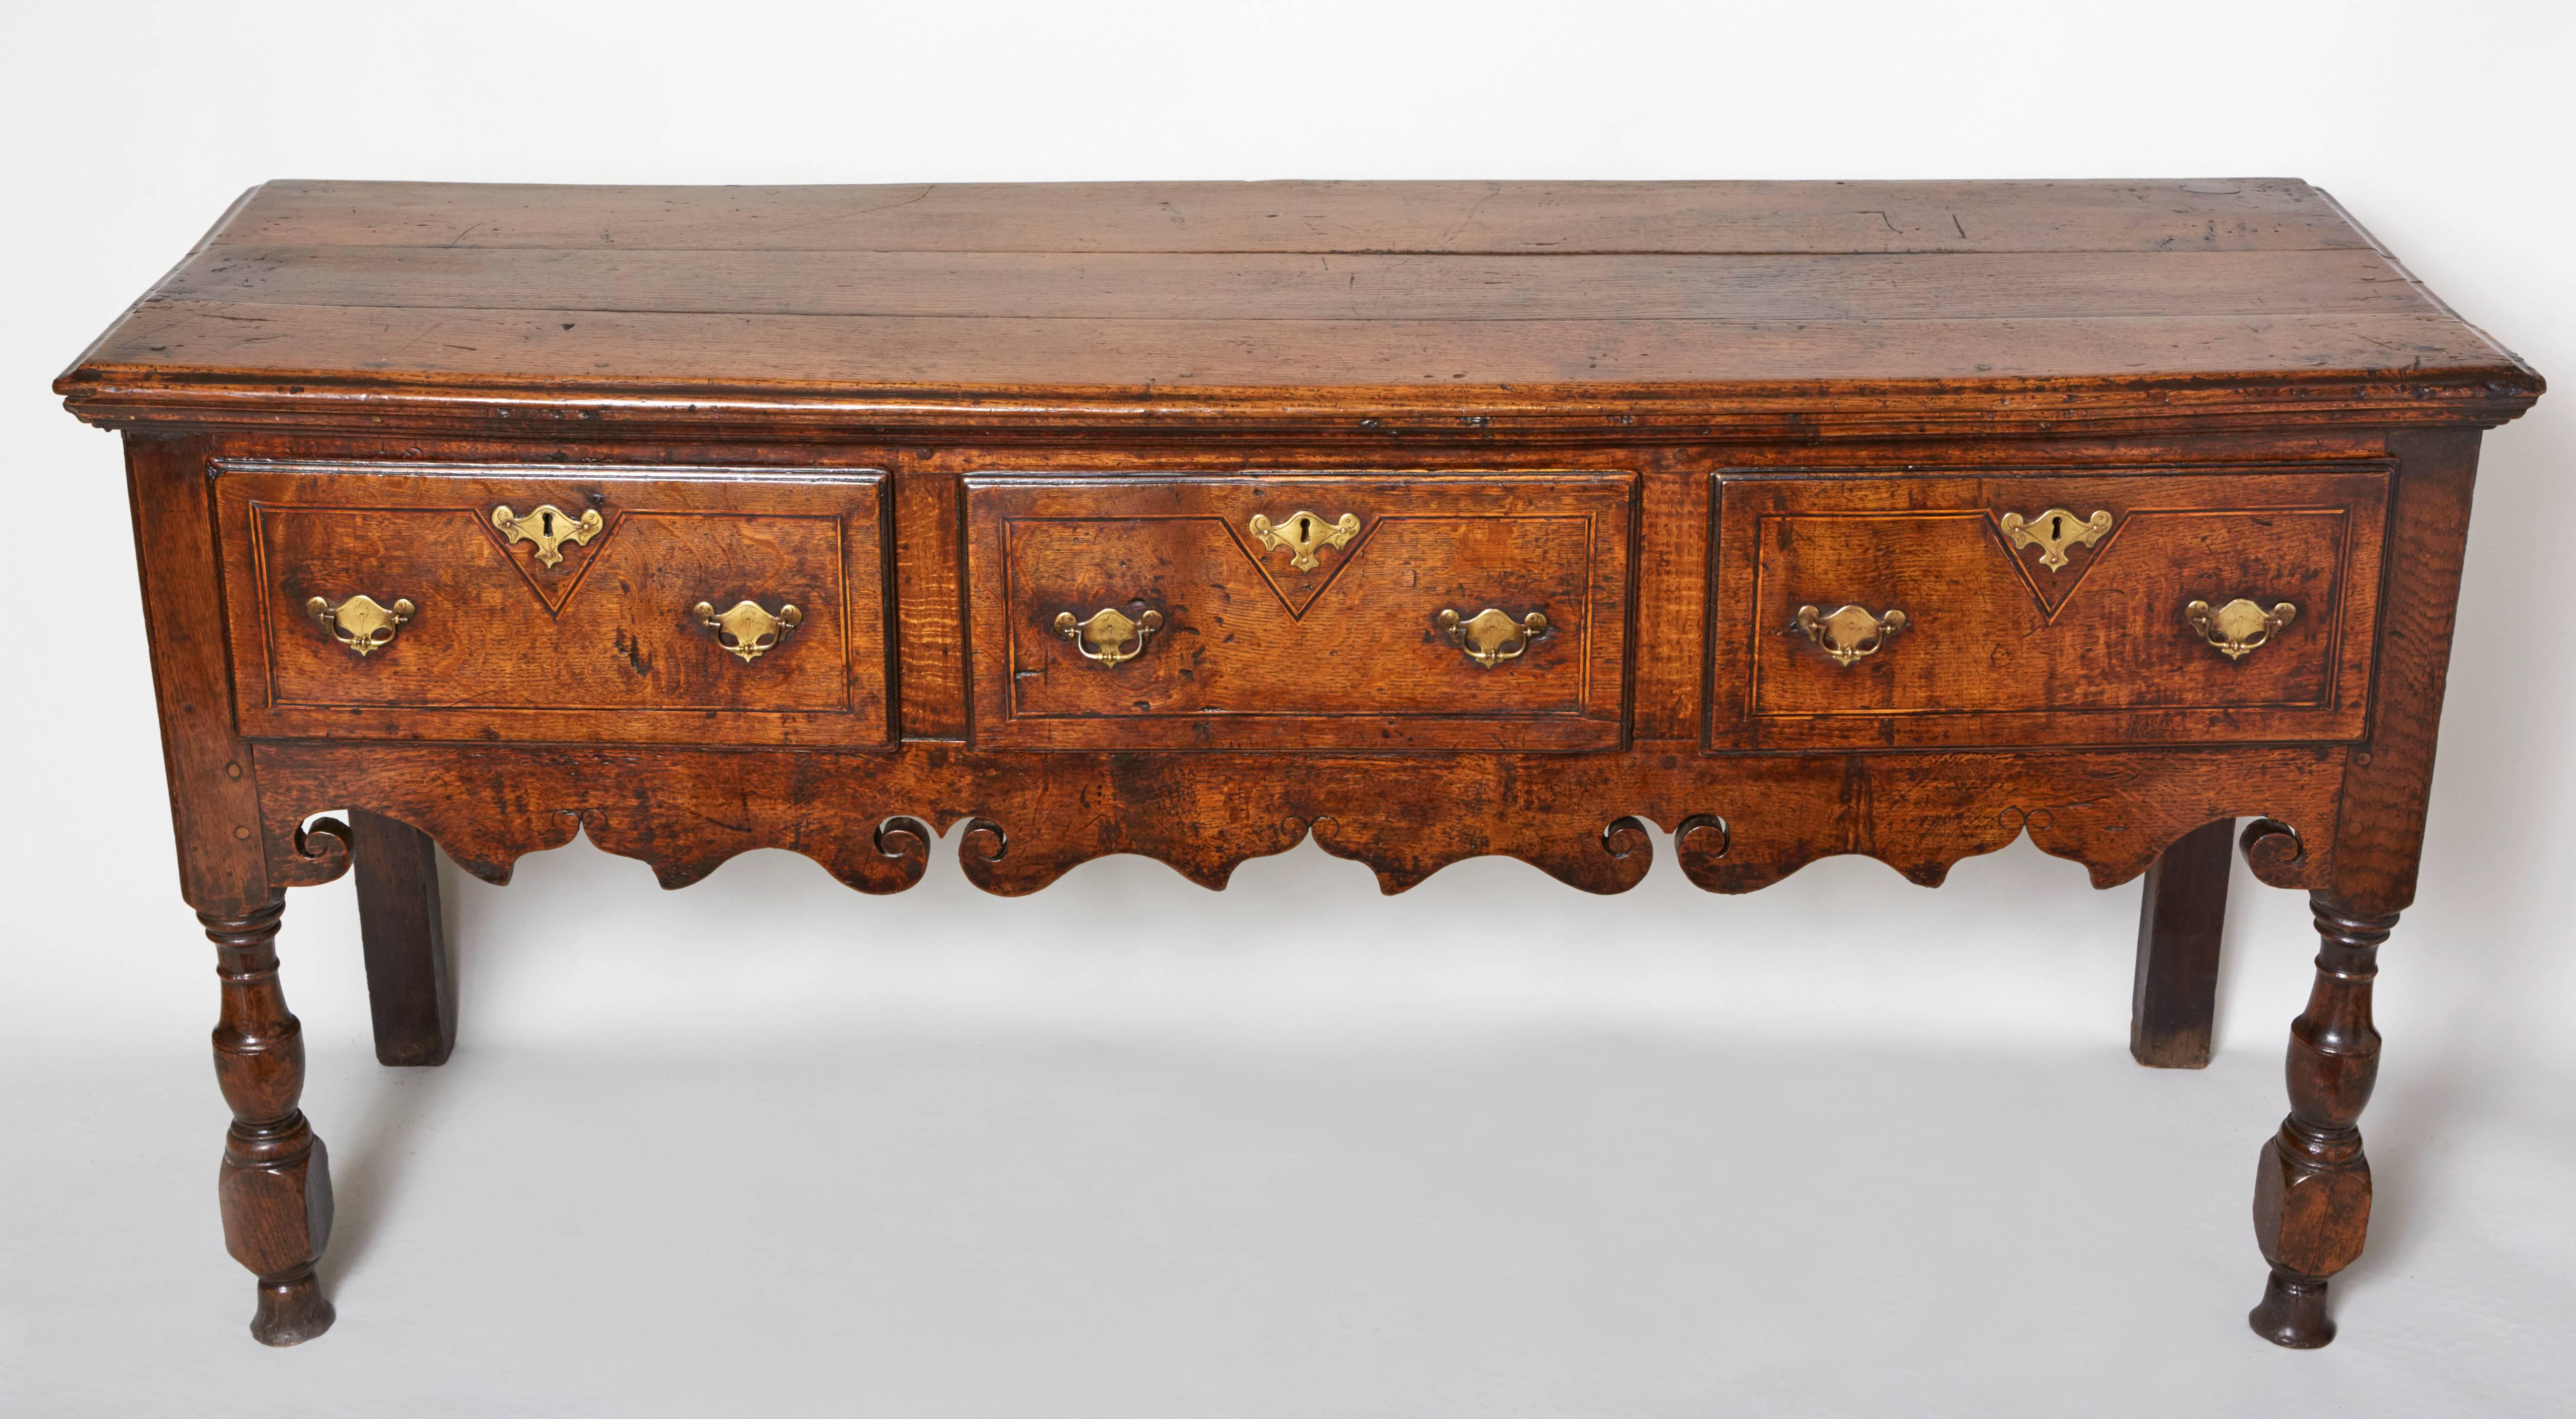 A fine early 18th century English oak low dresser, having a molded top over three inlaid drawers over lovely scalloped apron with whale's tail and cupid bow scalloping, standing on boldly turned legs, the whole possessing exceptionally rich color